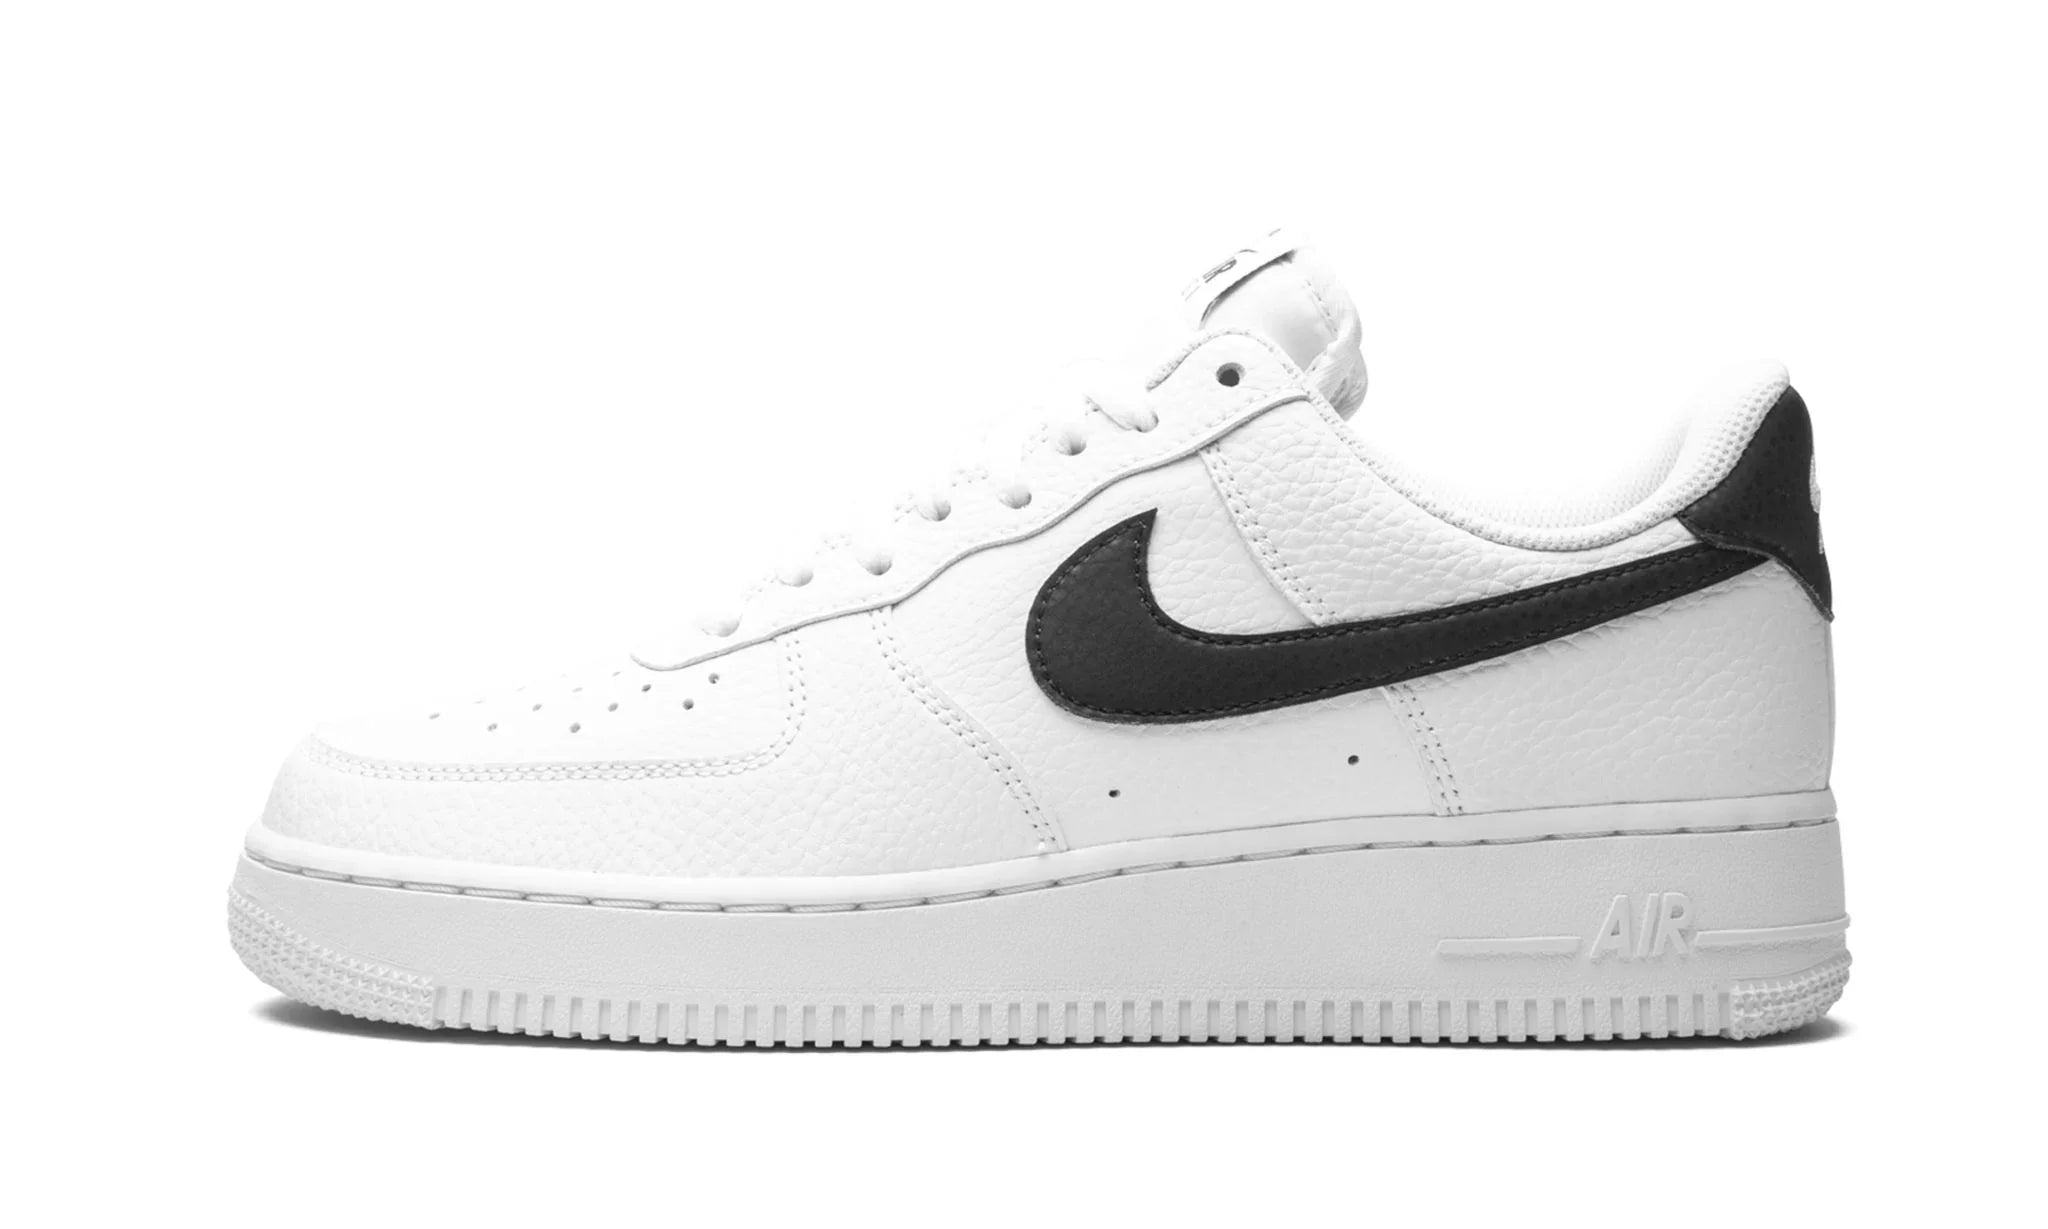 Obuv Nike Air Force 1 Low 07 White Black Pebbled Leather - SneakerDefinition